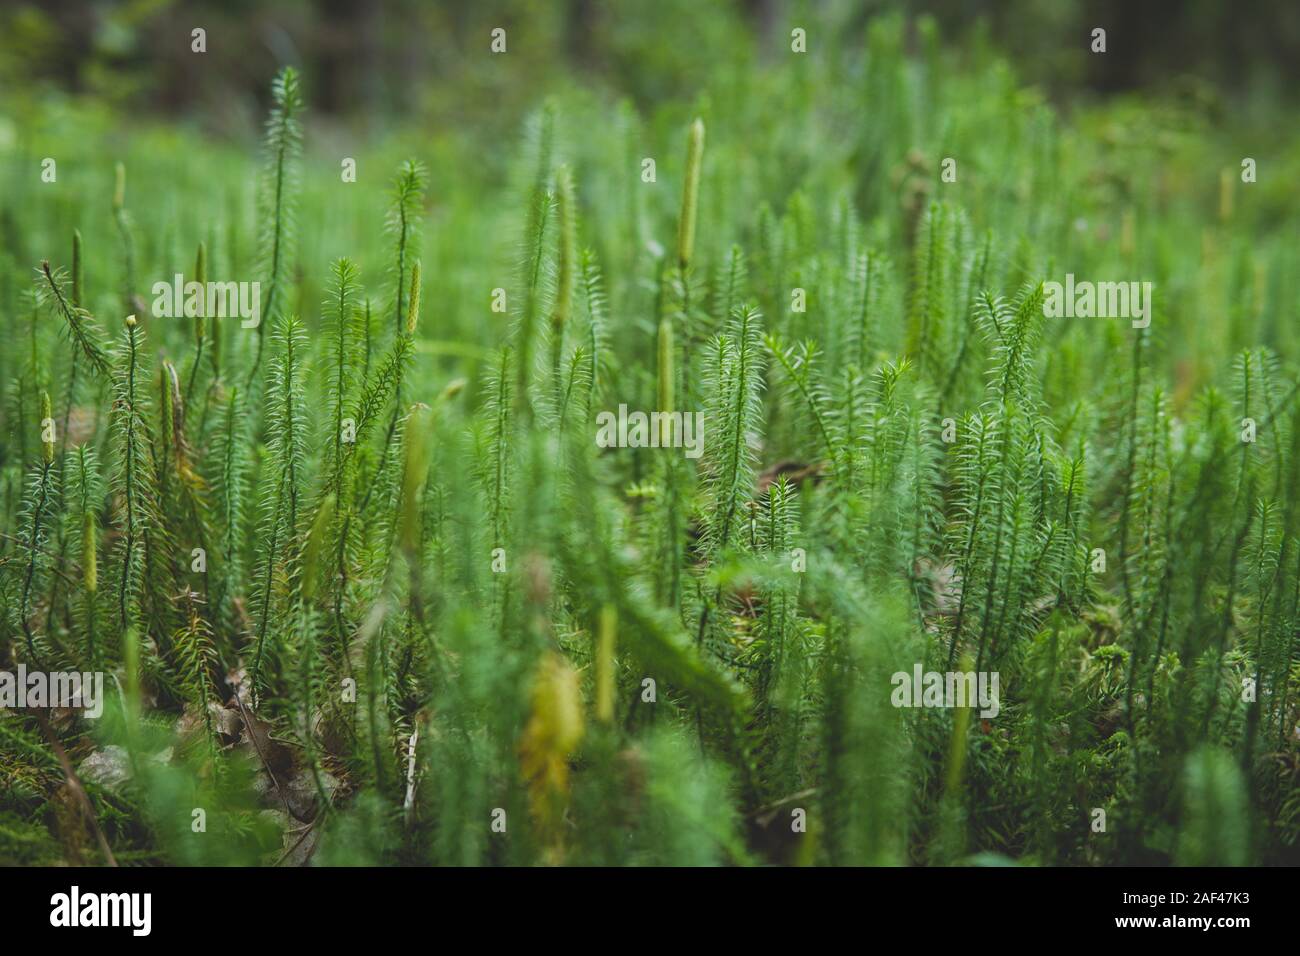 close up of clubmosses growing on the ground inside of a forest Stock Photo